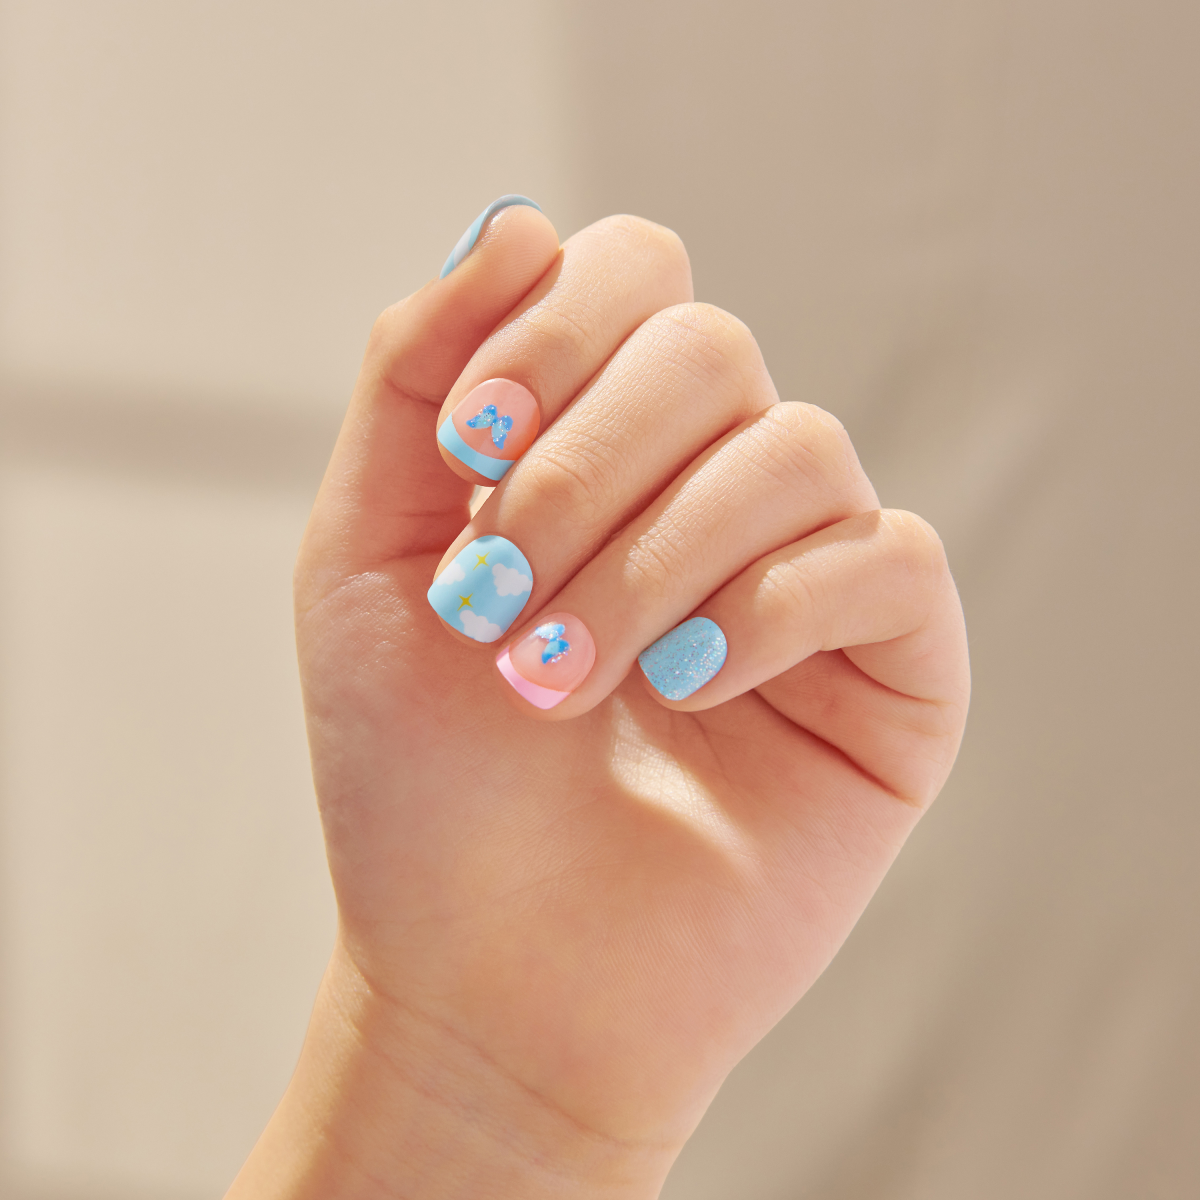 Brighten Up Your Nails: Summer Nail Art Ideas - COWGIRL Magazine